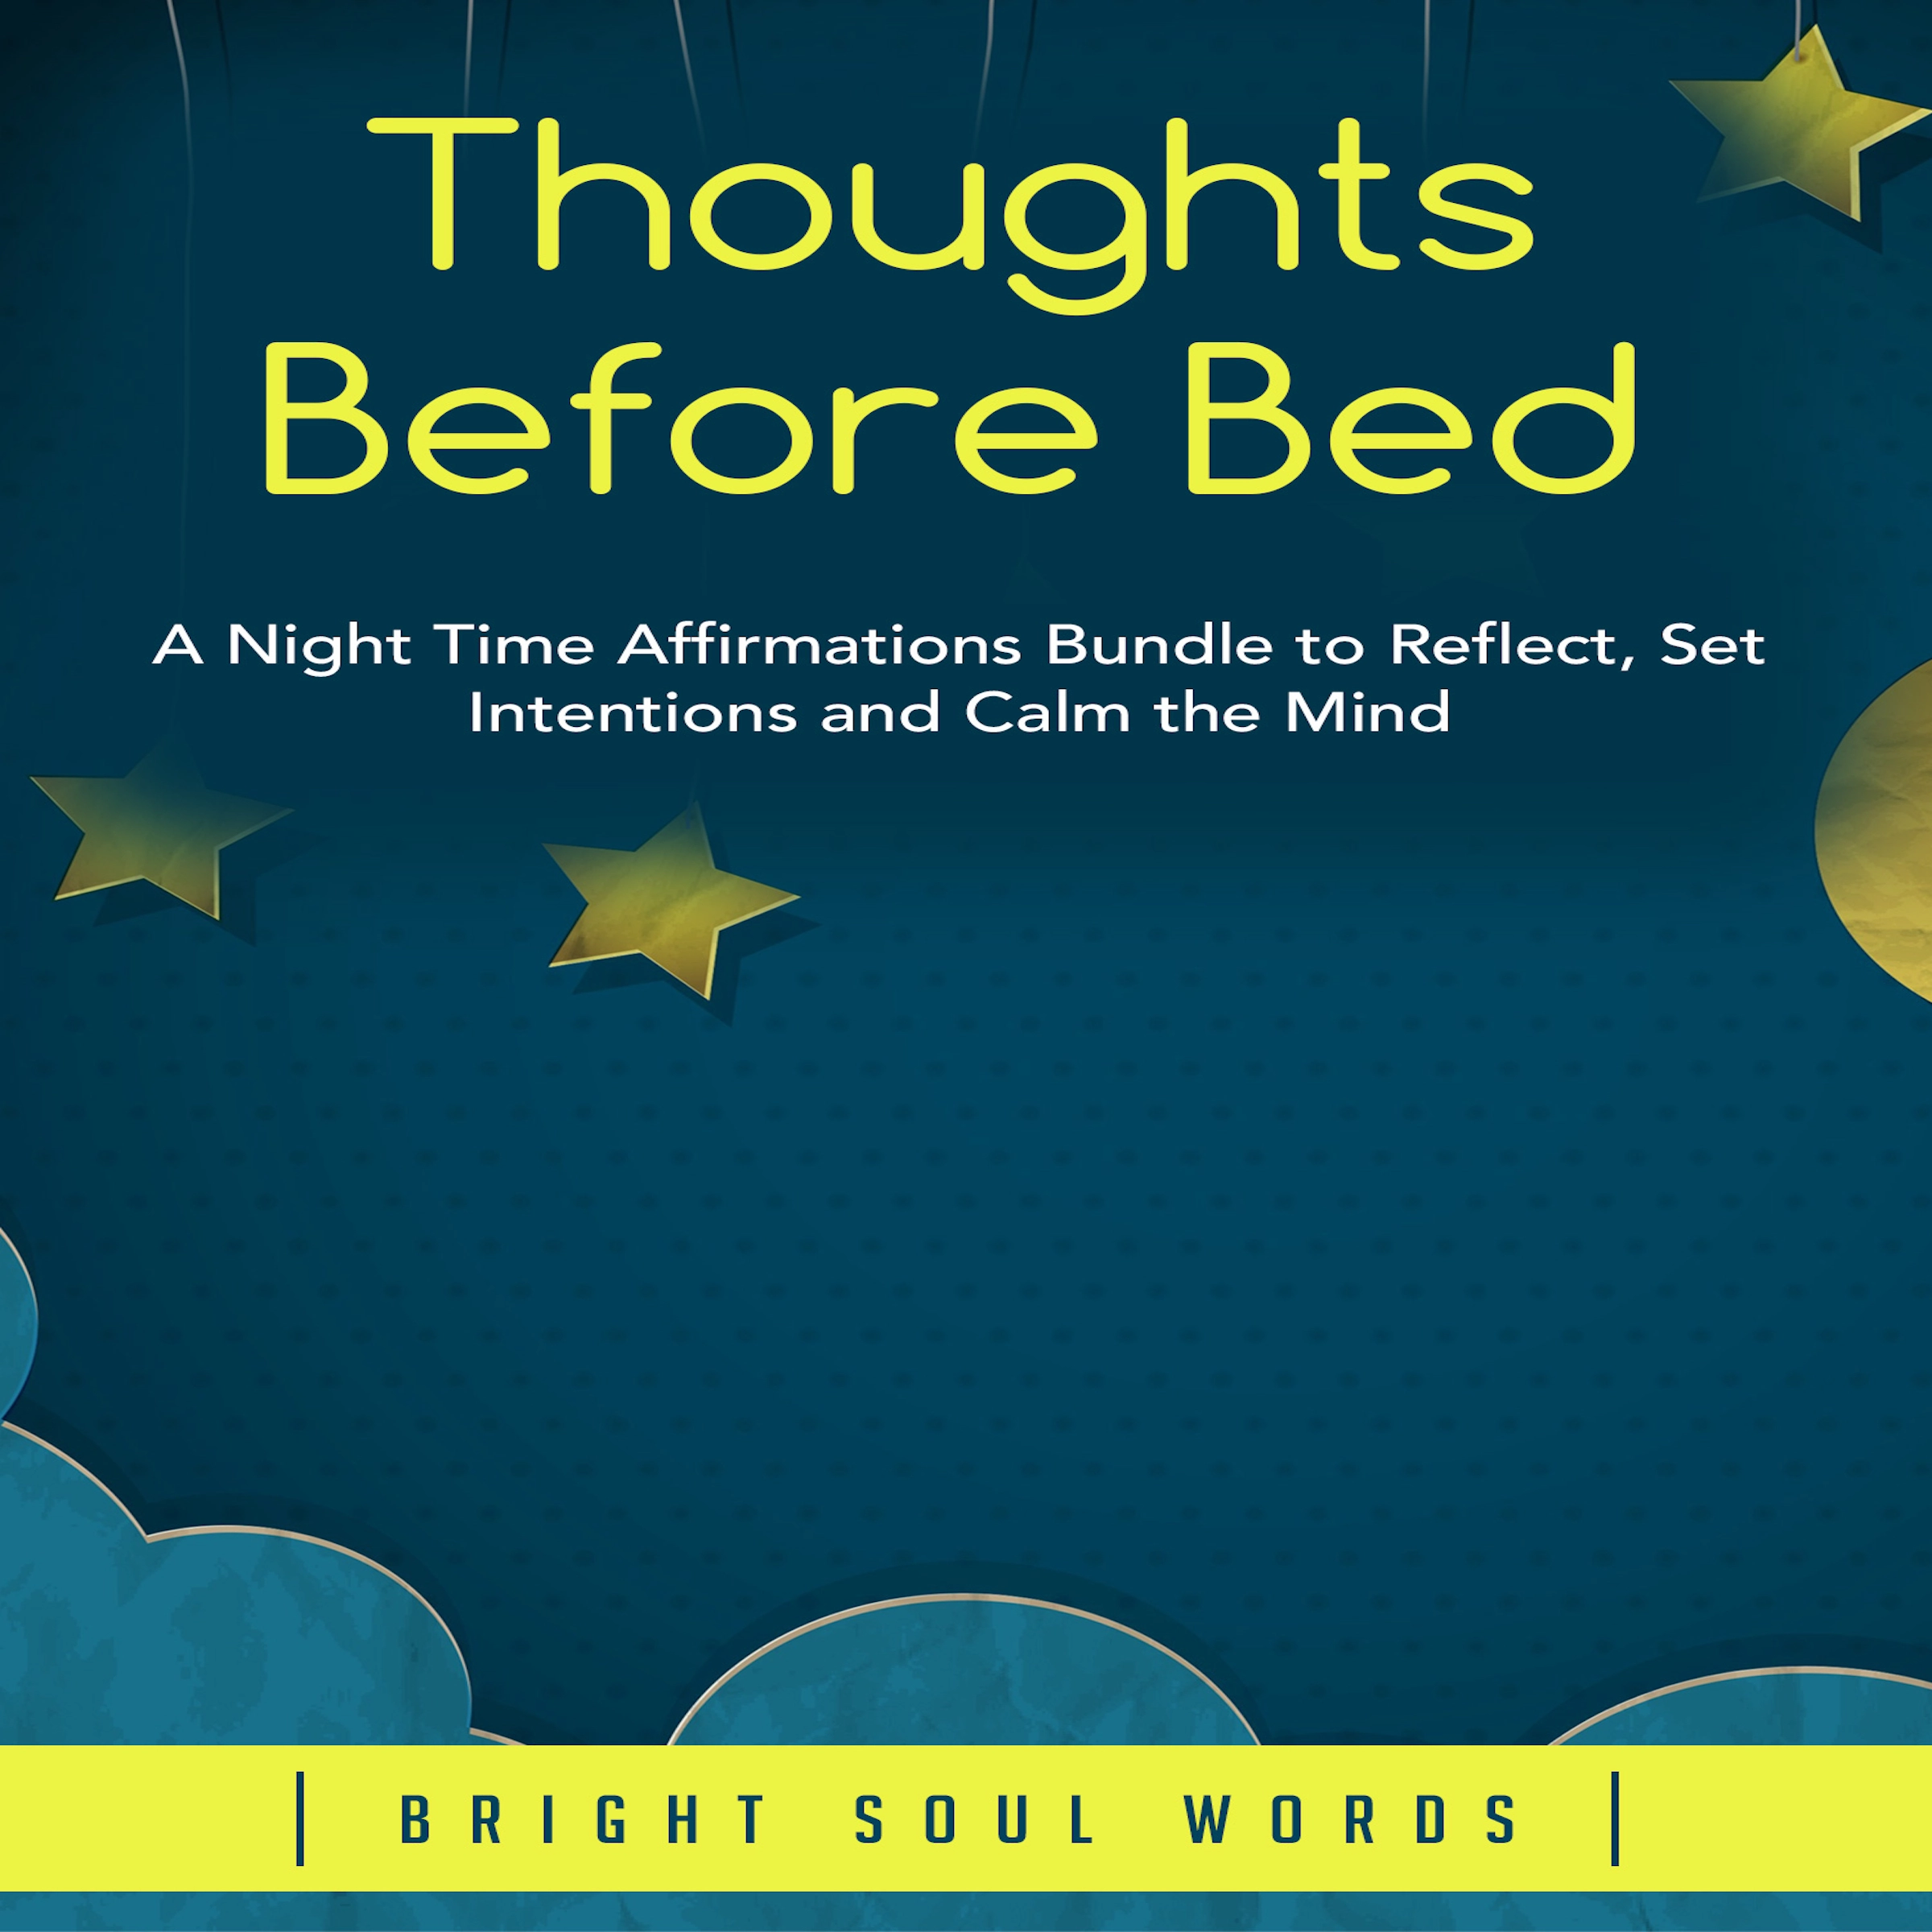 Thoughts Before Bed: A Night Time Affirmations Bundle to Reflect, Set Intentions and Calm the Mind Audiobook by Bright Soul Words